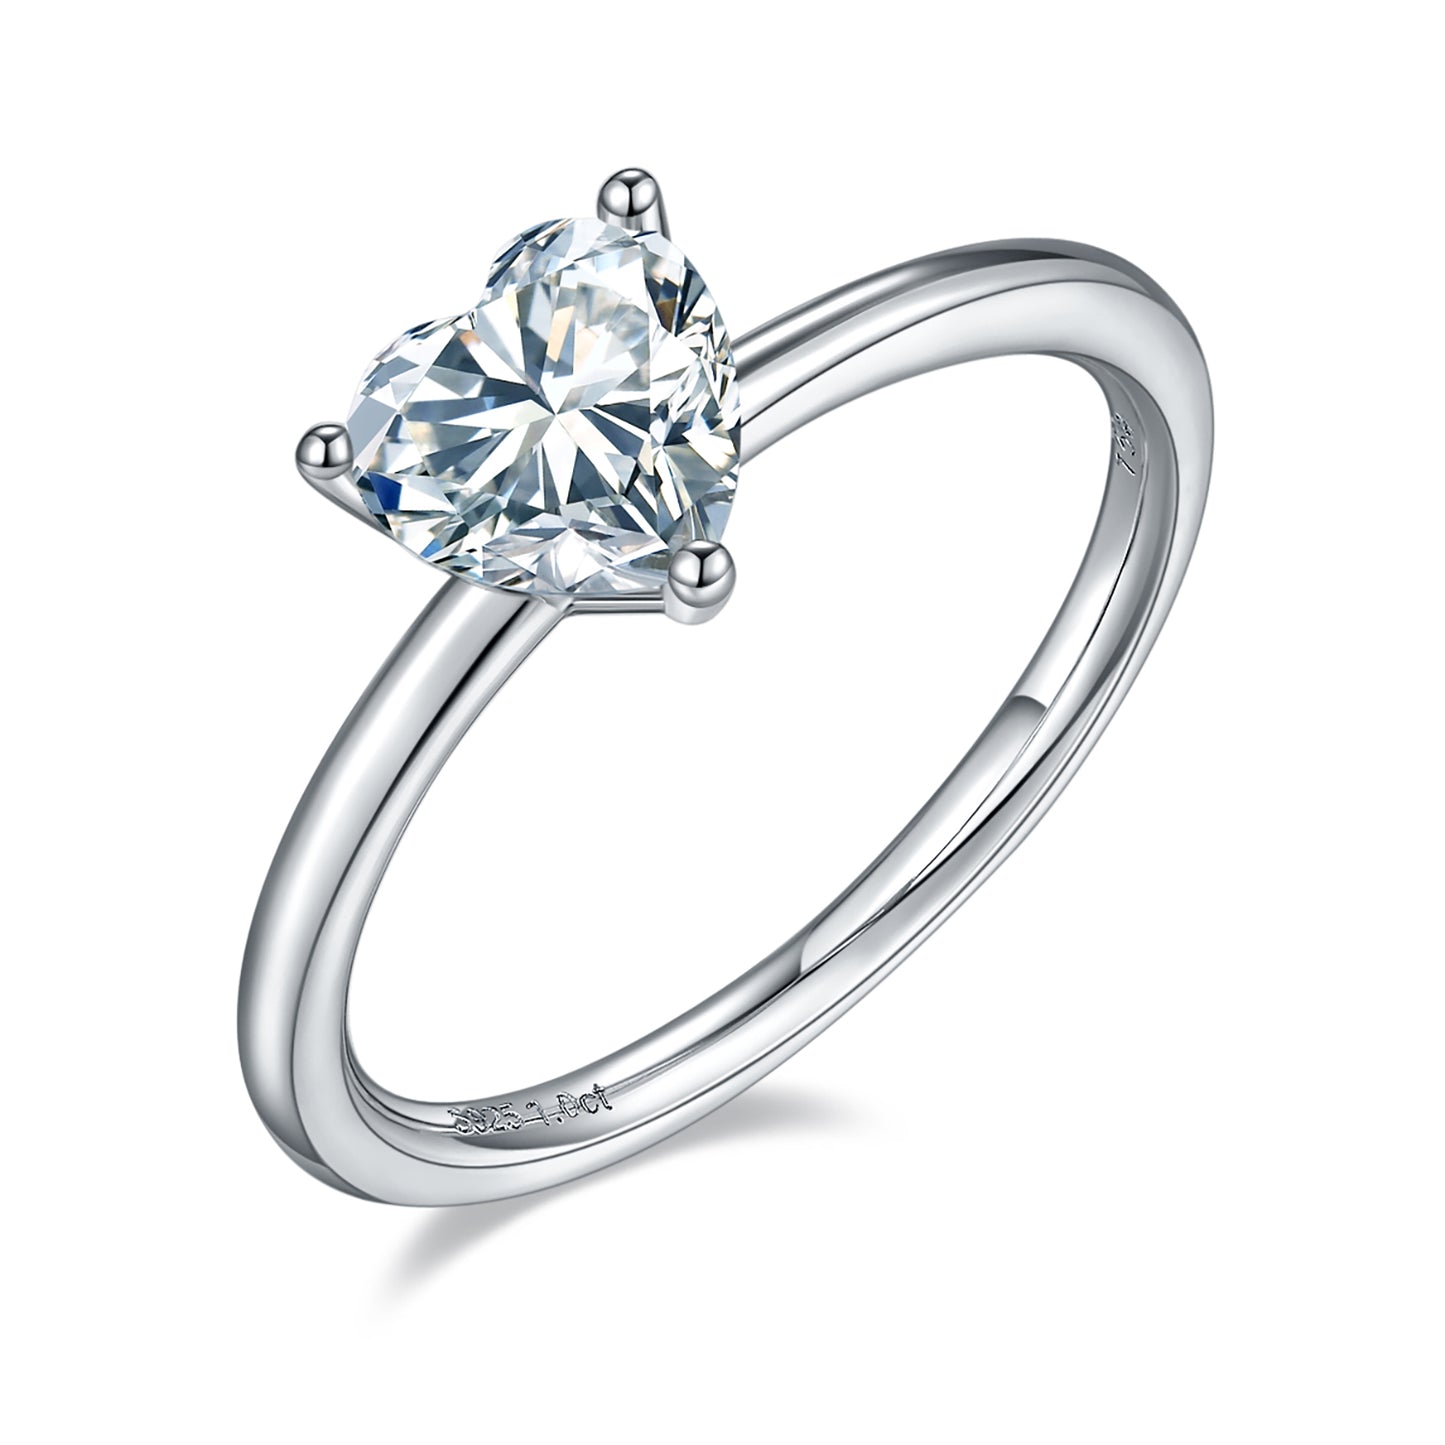 1 Carat Heart Cut Moissanite Solitaire Ring, Art Deco Ring, Plain Band Ring In 925 Sterling Silver